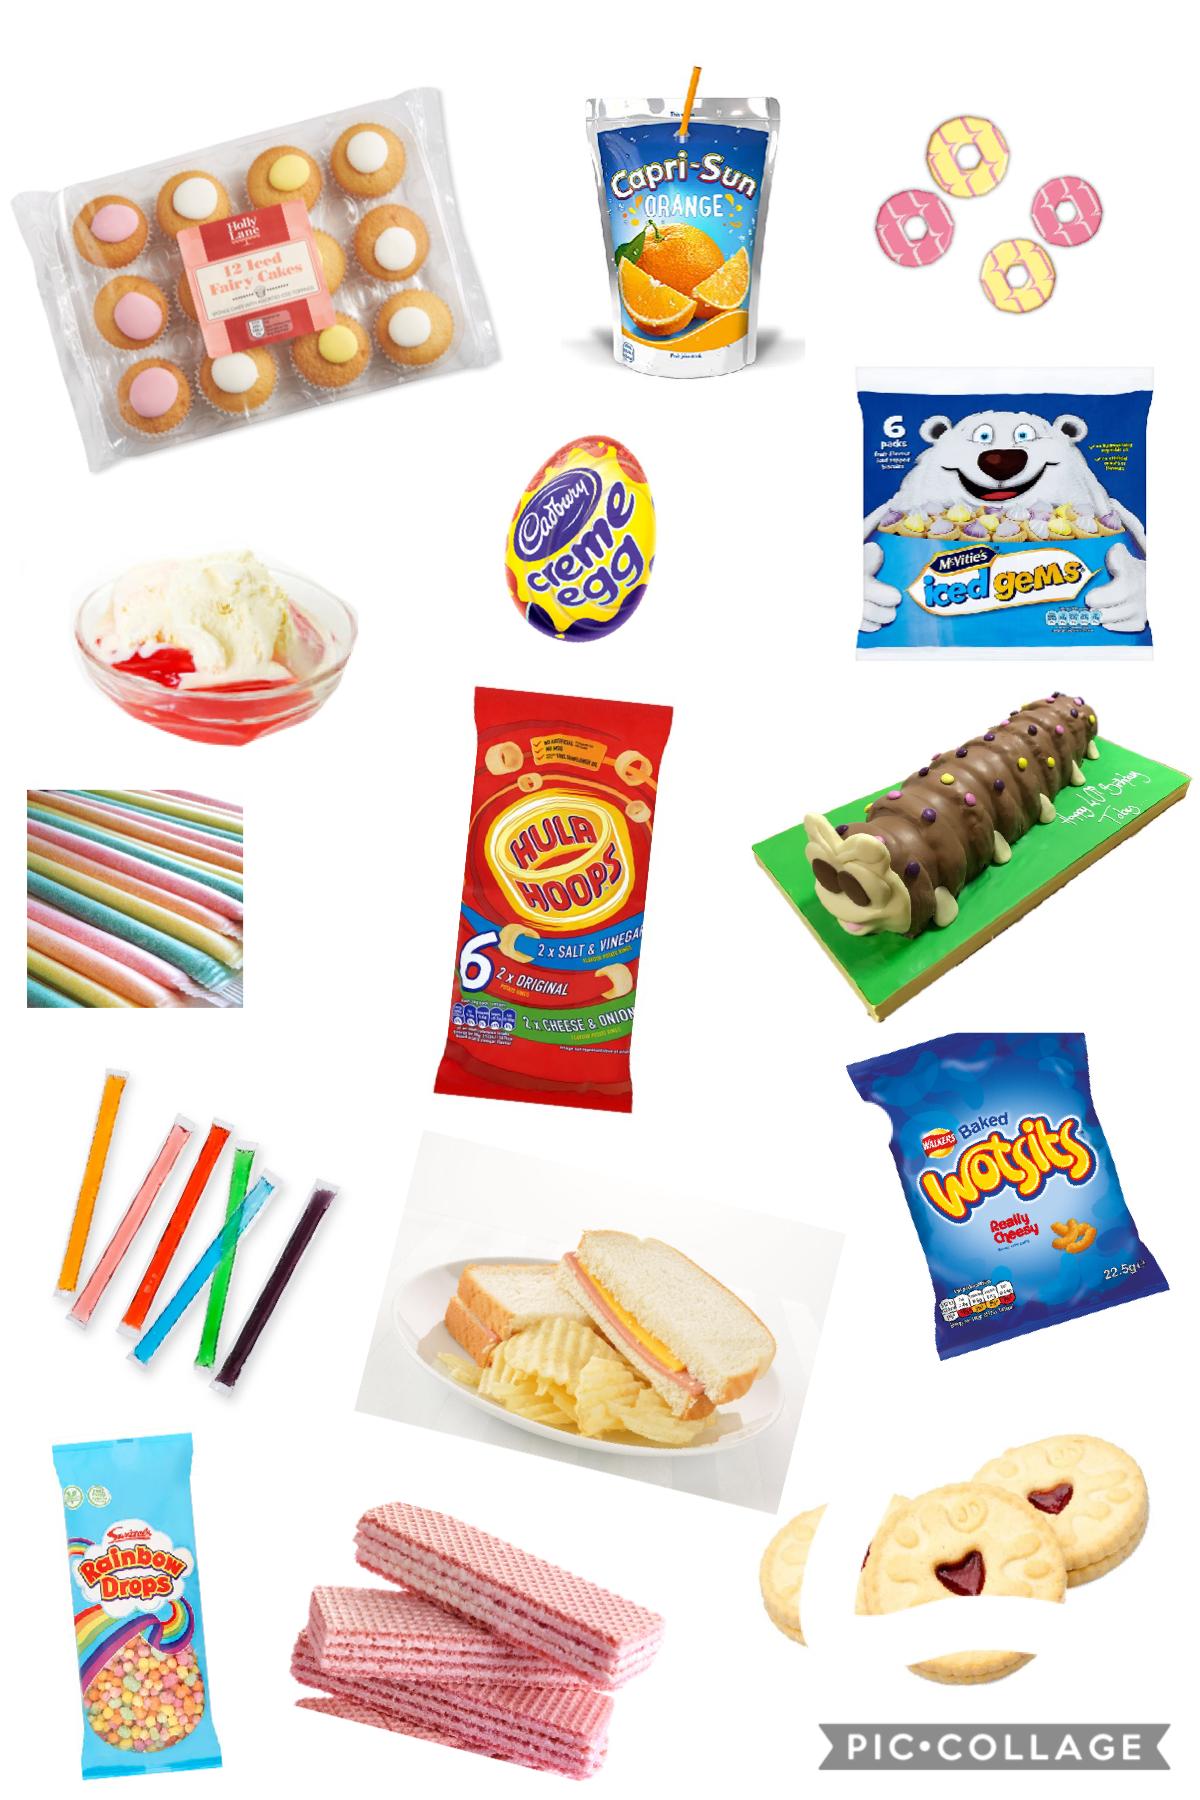 British party foods EVERYONE had as a kid😂.          
What ones did you have